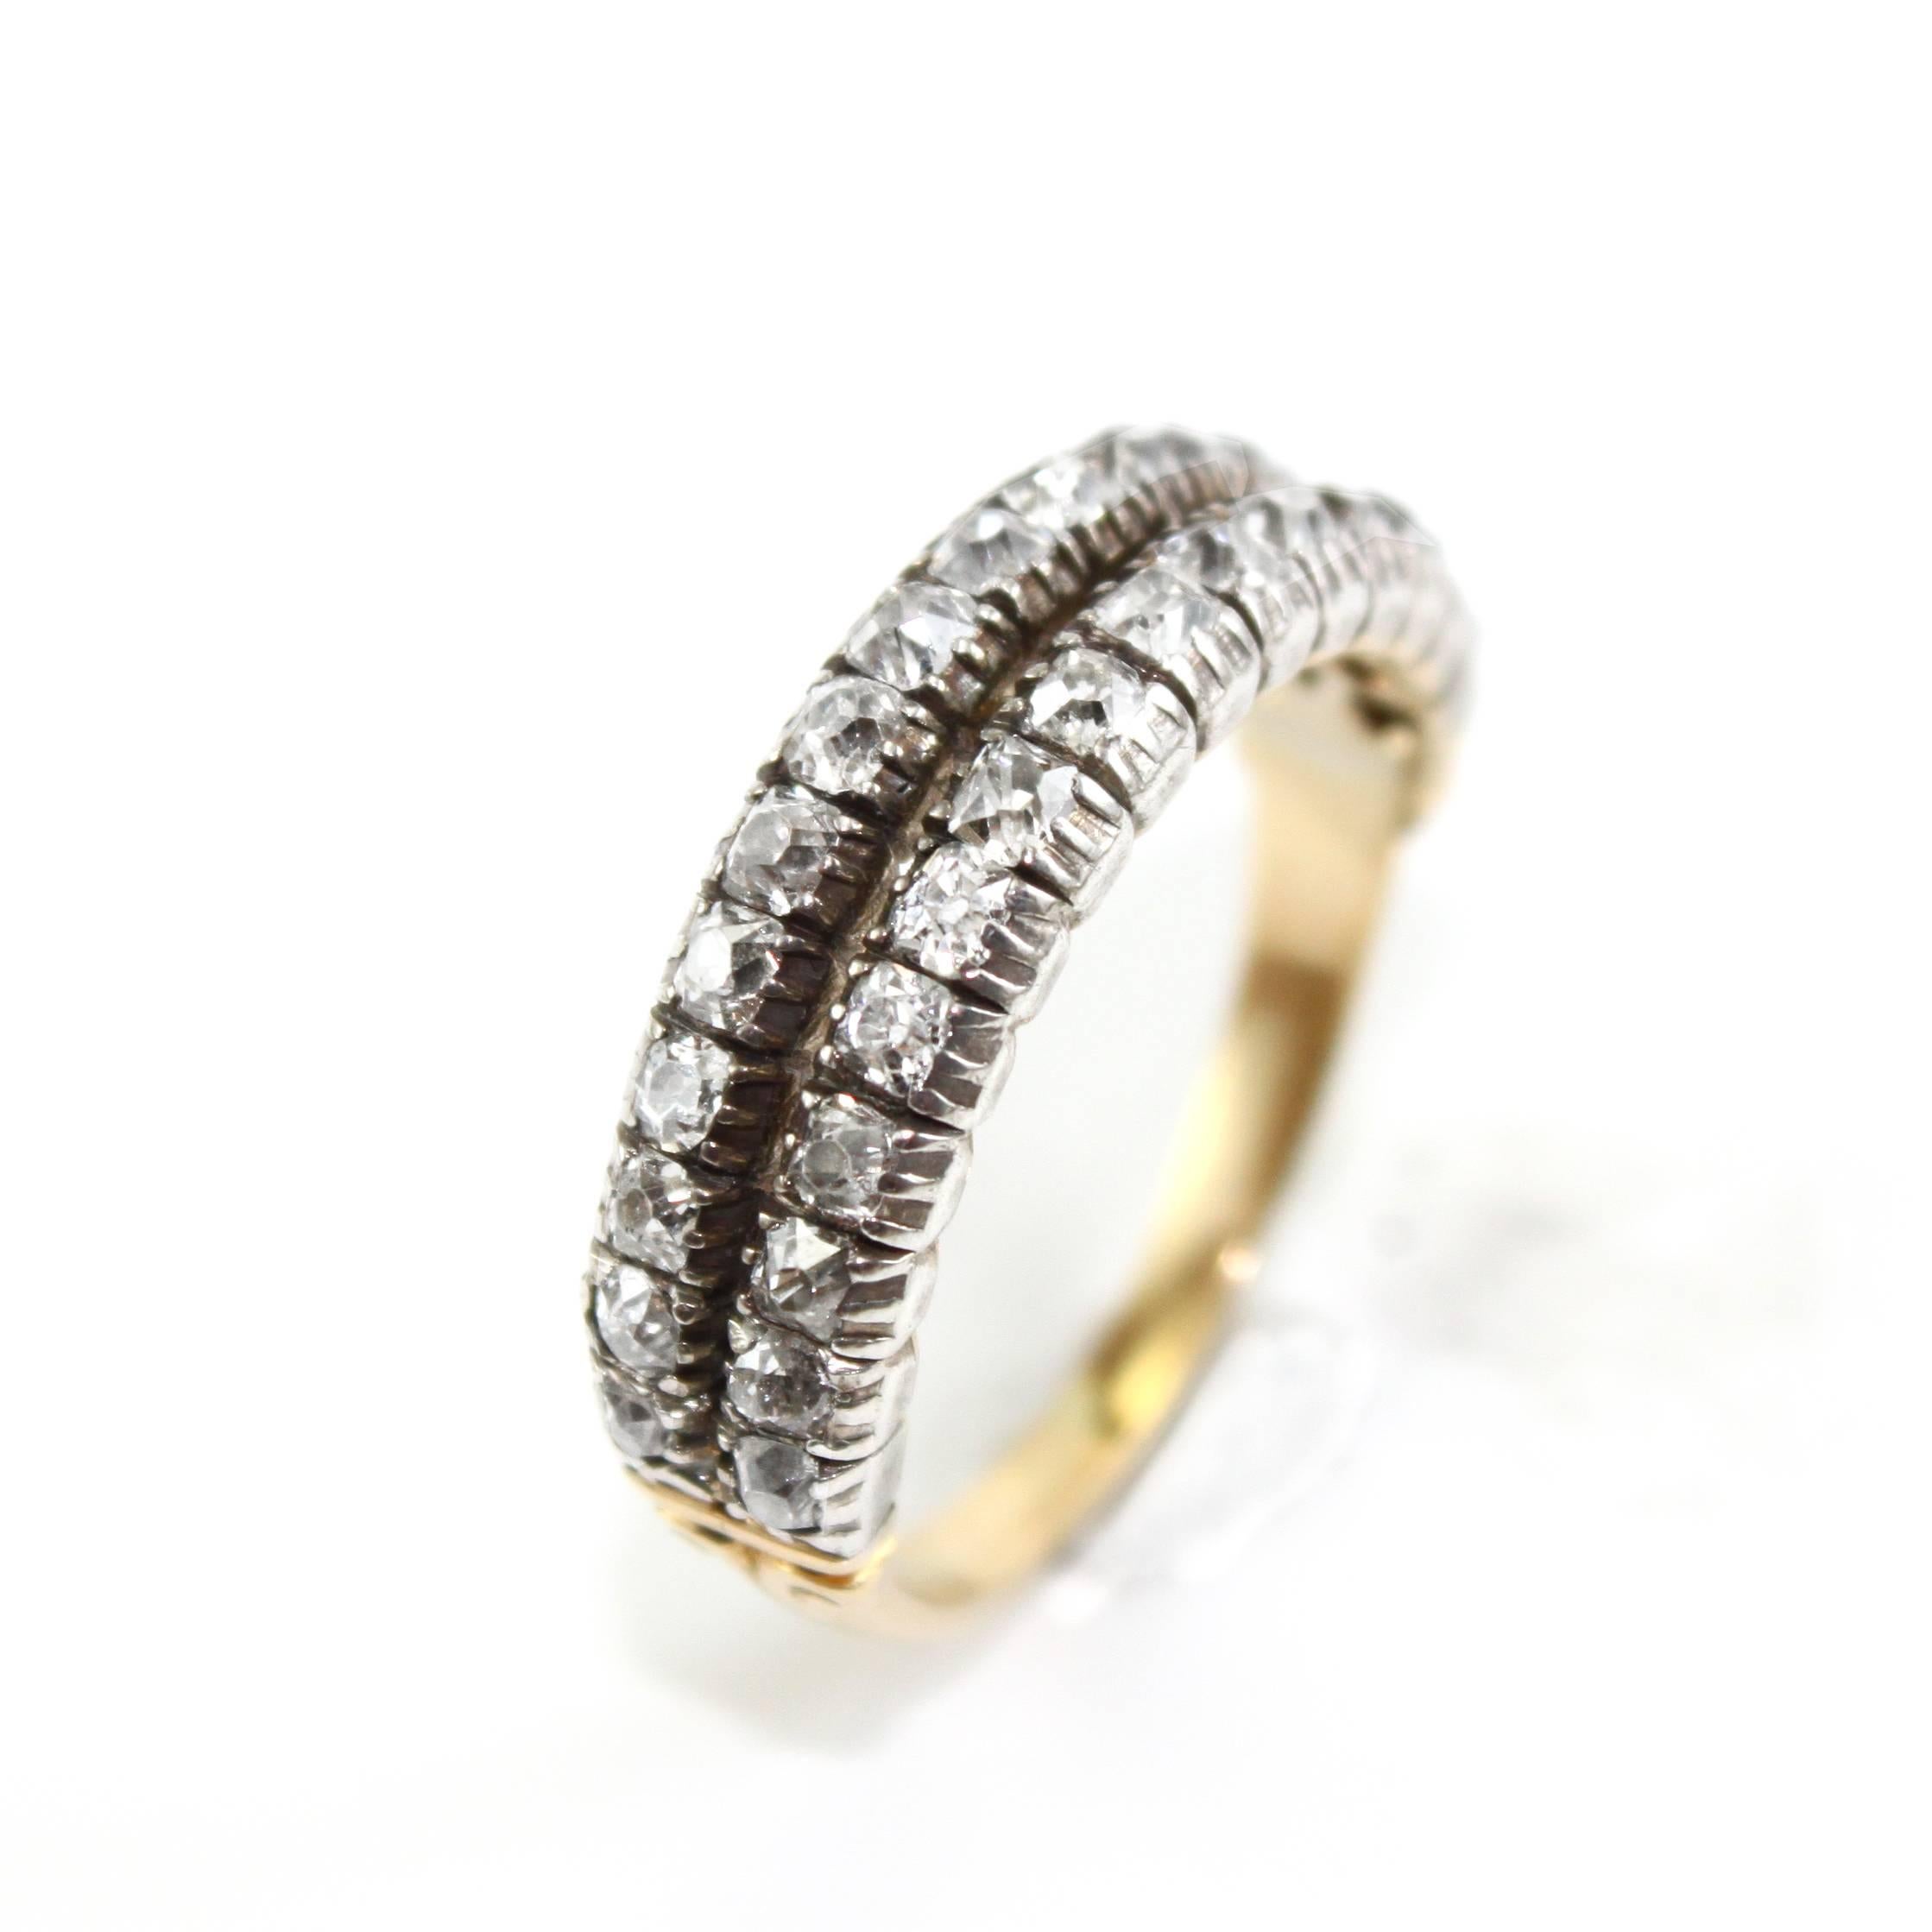 Victorian diamond ring with two rows of old European cut diamonds in yellow gold, ca. 1890s. The ring has 30 diamonds and the total diamond weight is circa 2.5 carats, H/I colour and VS clarity. With scratched inventory number.

Ring size 8.